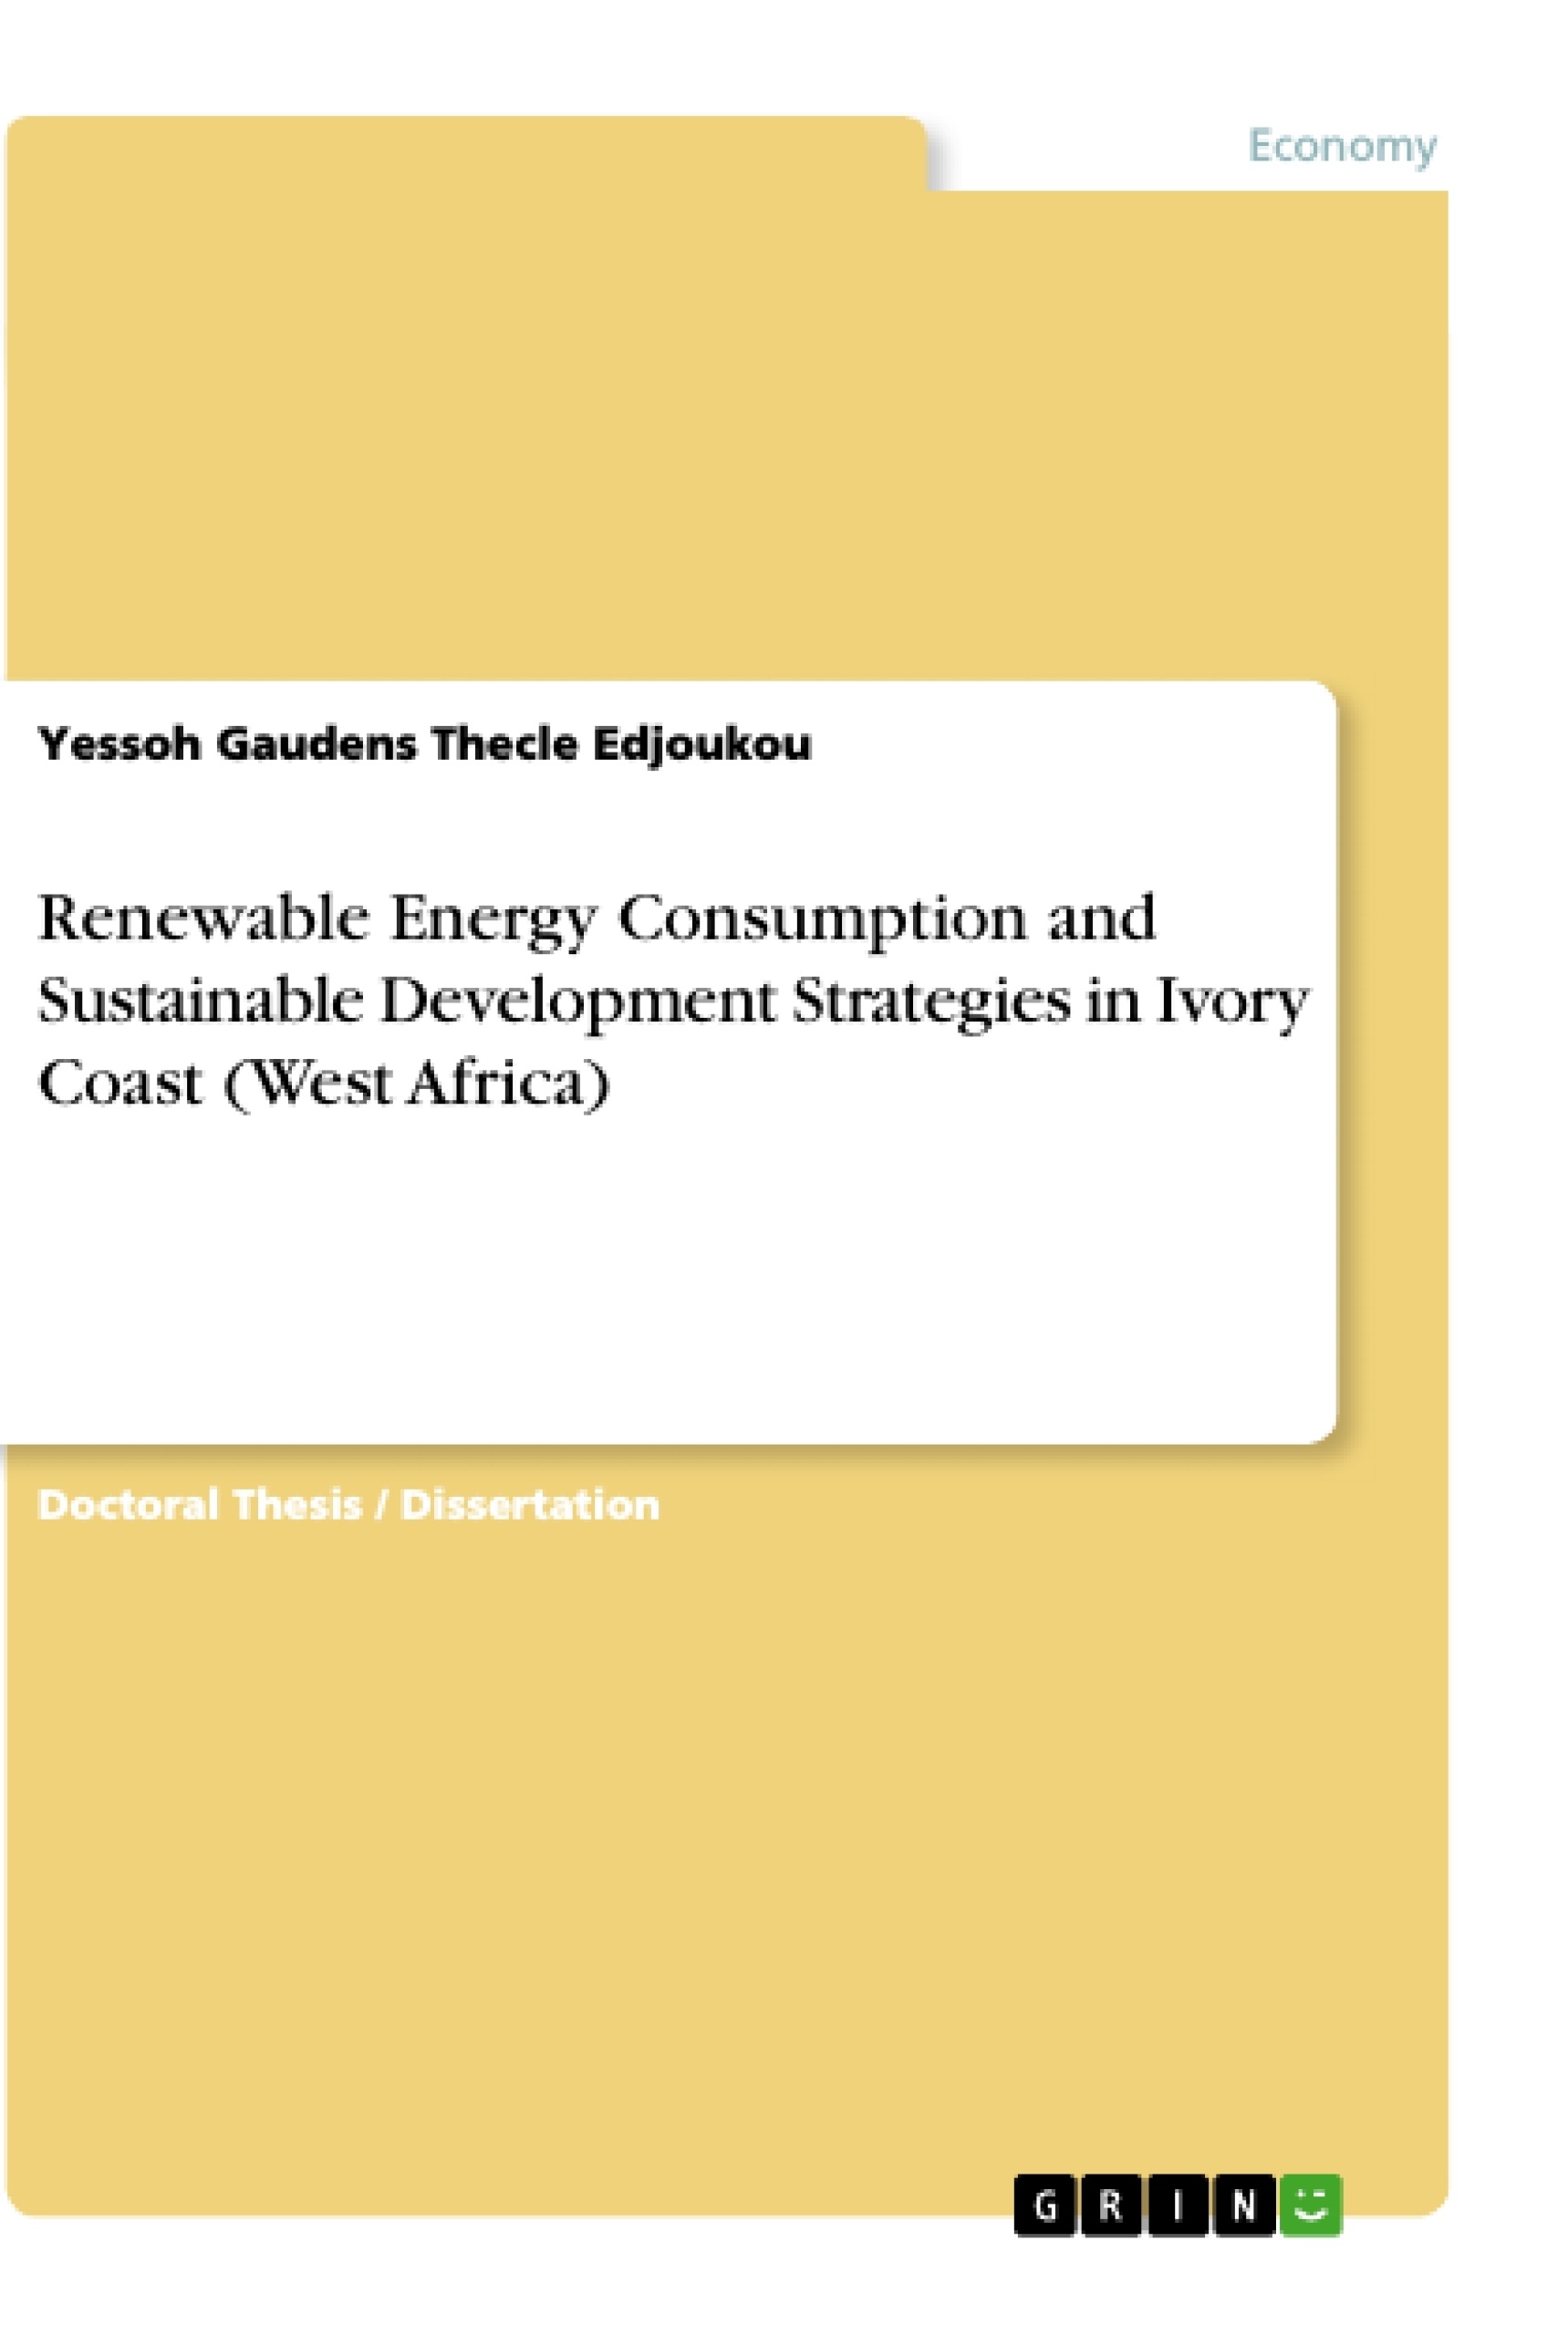 Title: Renewable Energy Consumption and Sustainable Development Strategies in Ivory Coast (West Africa)